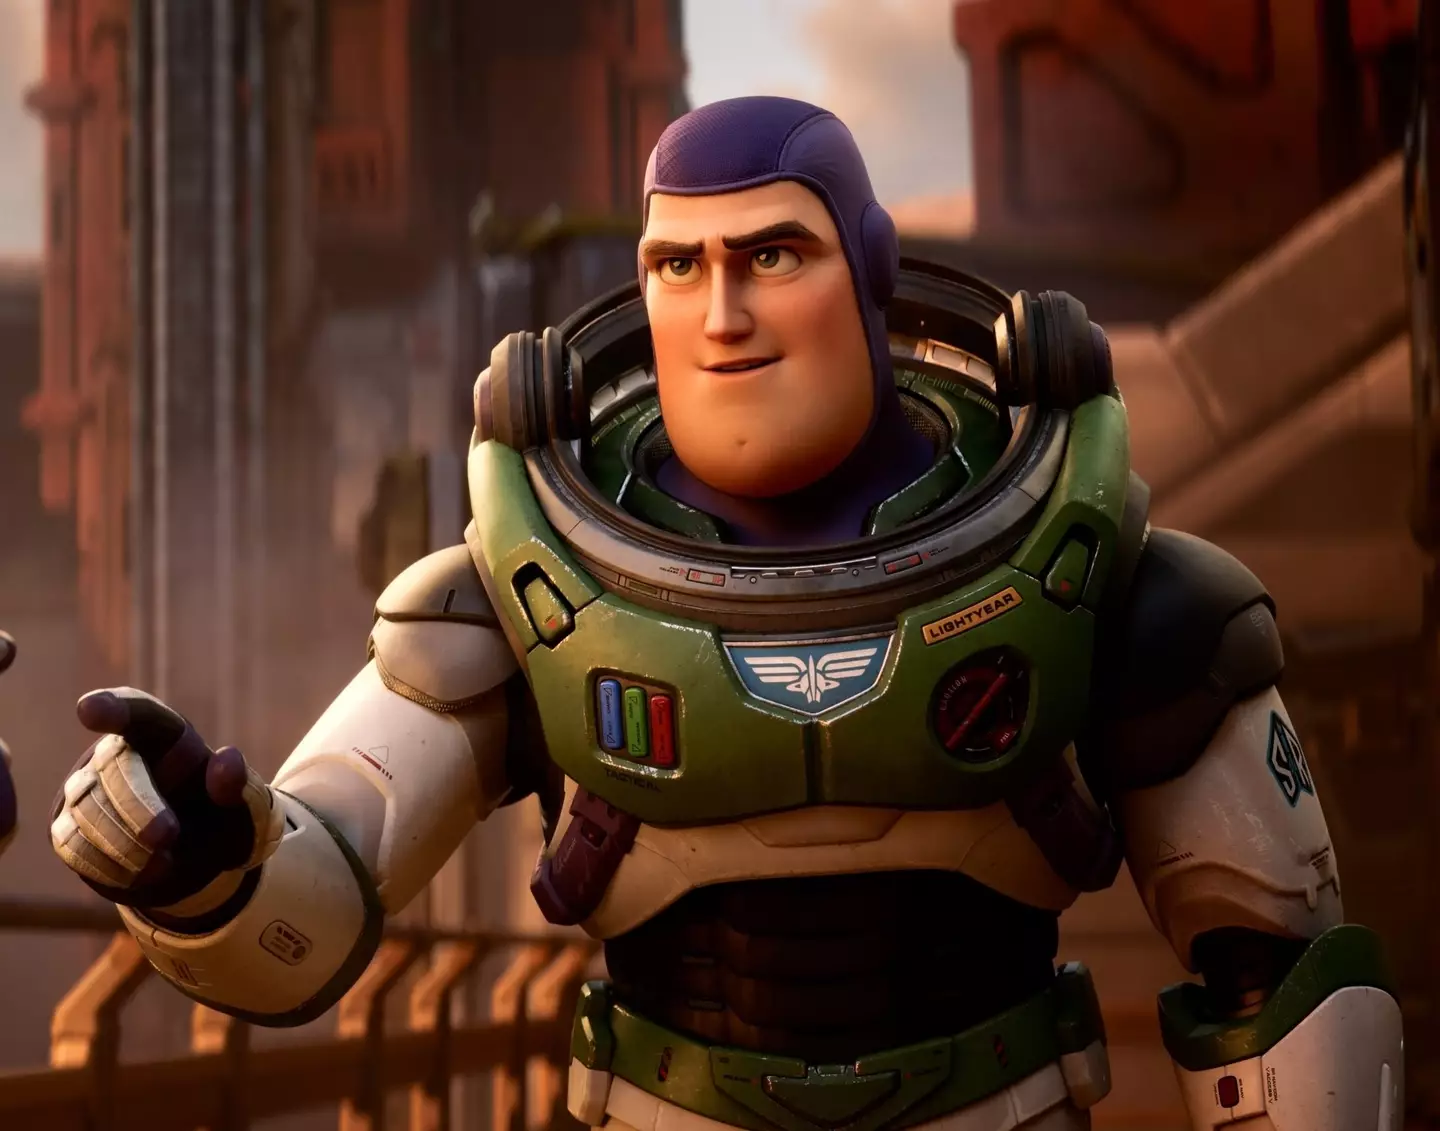 Lightyear has had an opening weekend about $20 million lower than predicted.